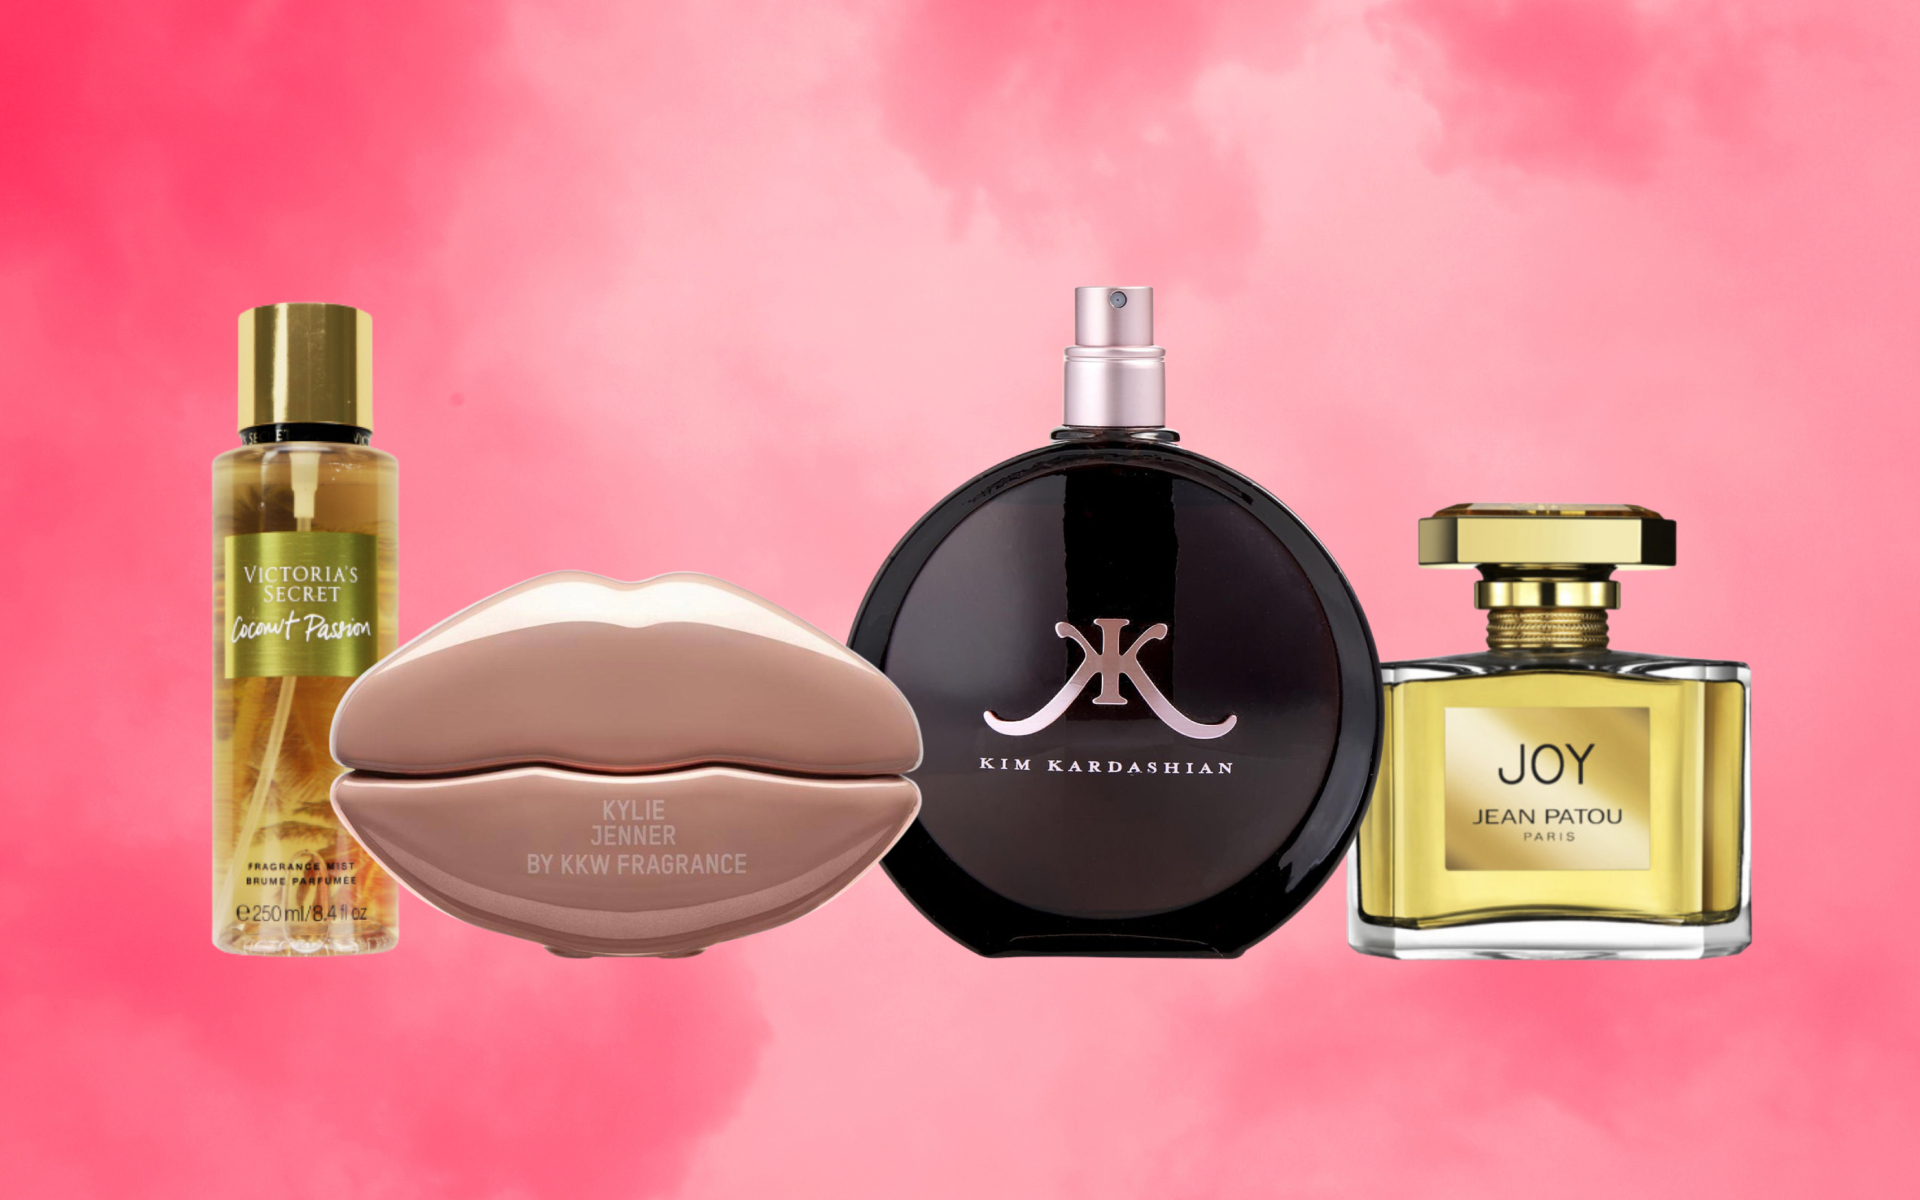 What Perfume Does Kylie Jenner Wear